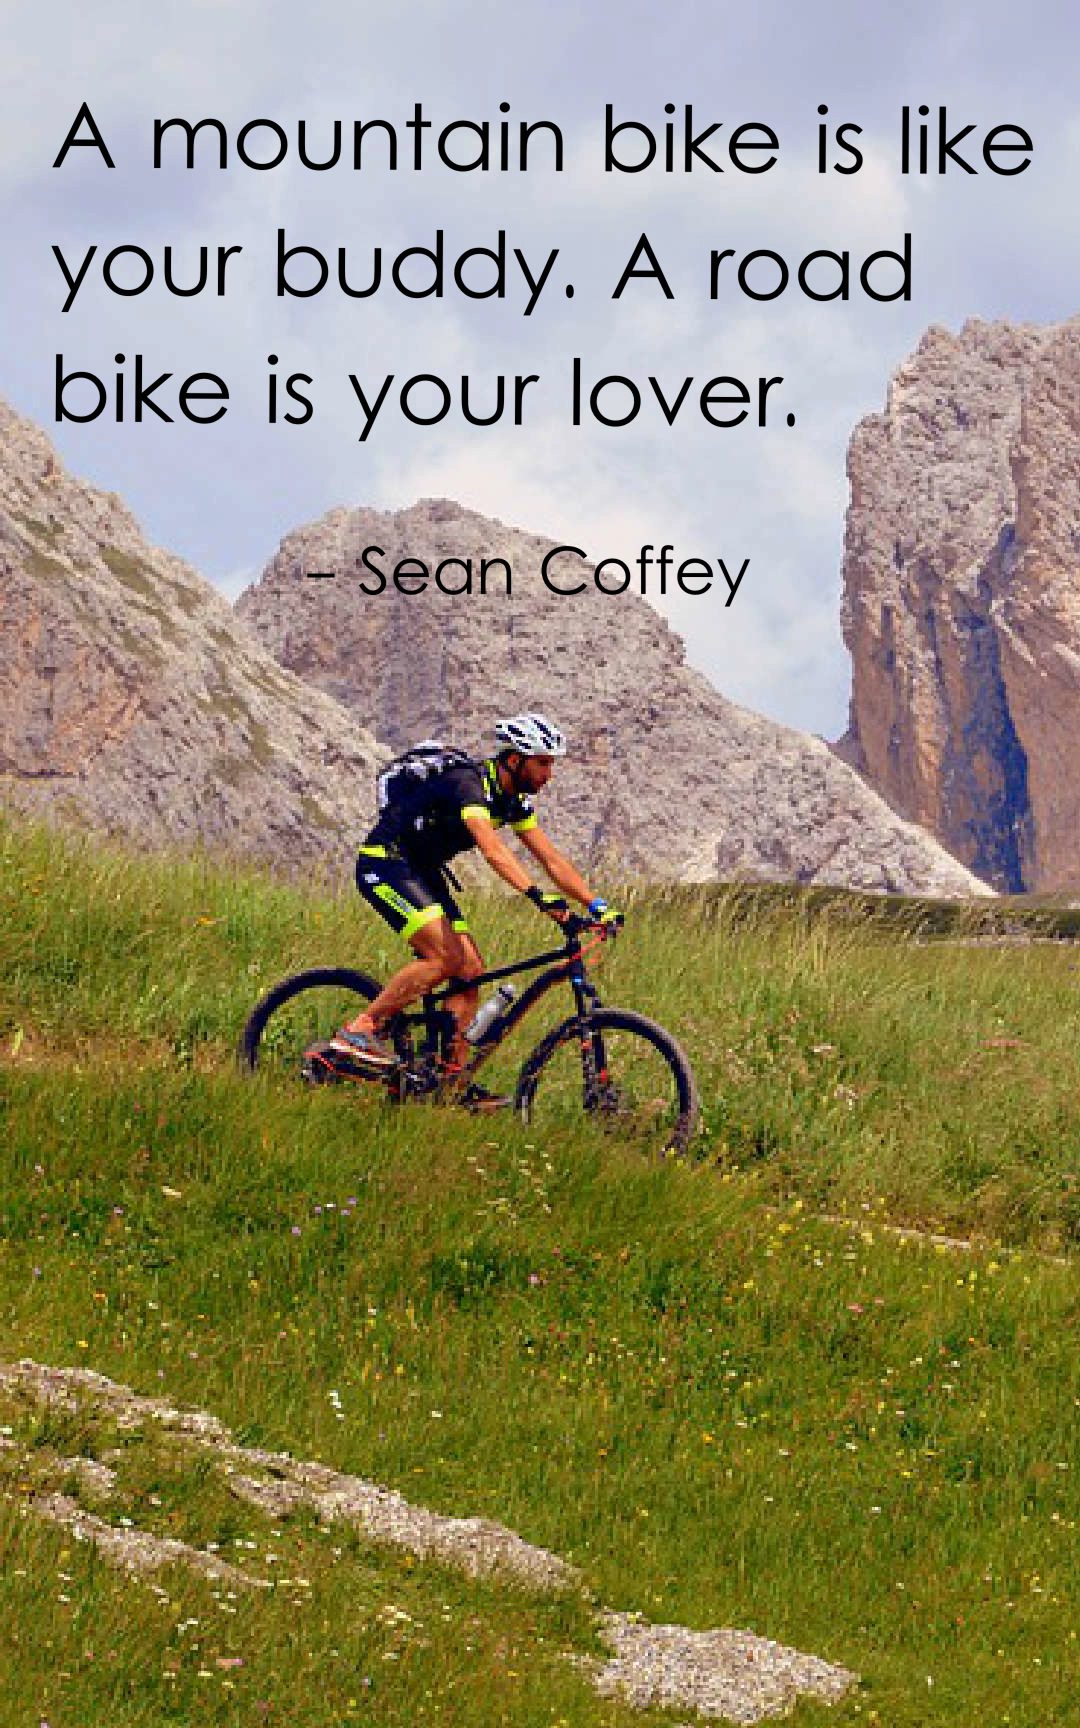 48 Inspirational Bicycle Quotes With Images - A Mountain Bike Is Like Your BuDDy. A RoaD Bike Is Your Lover.